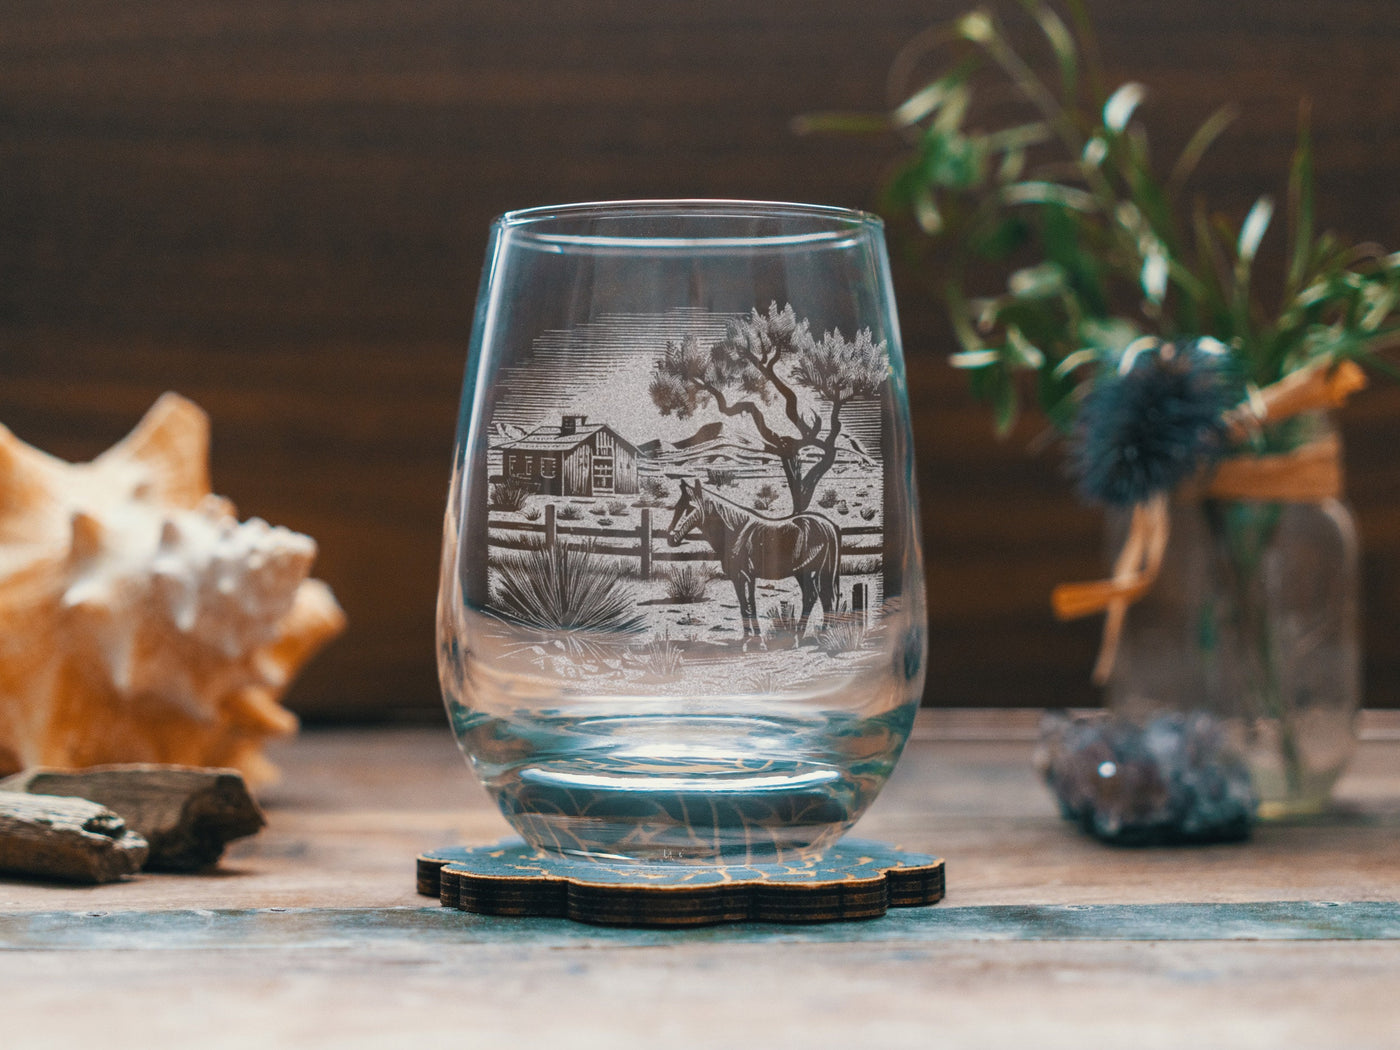 Wild West Horse Ranch Glasses | Personalized etched glassware for beer, whiskey, wine & cocktails. Western Desert Scene, Southwestern Decor.